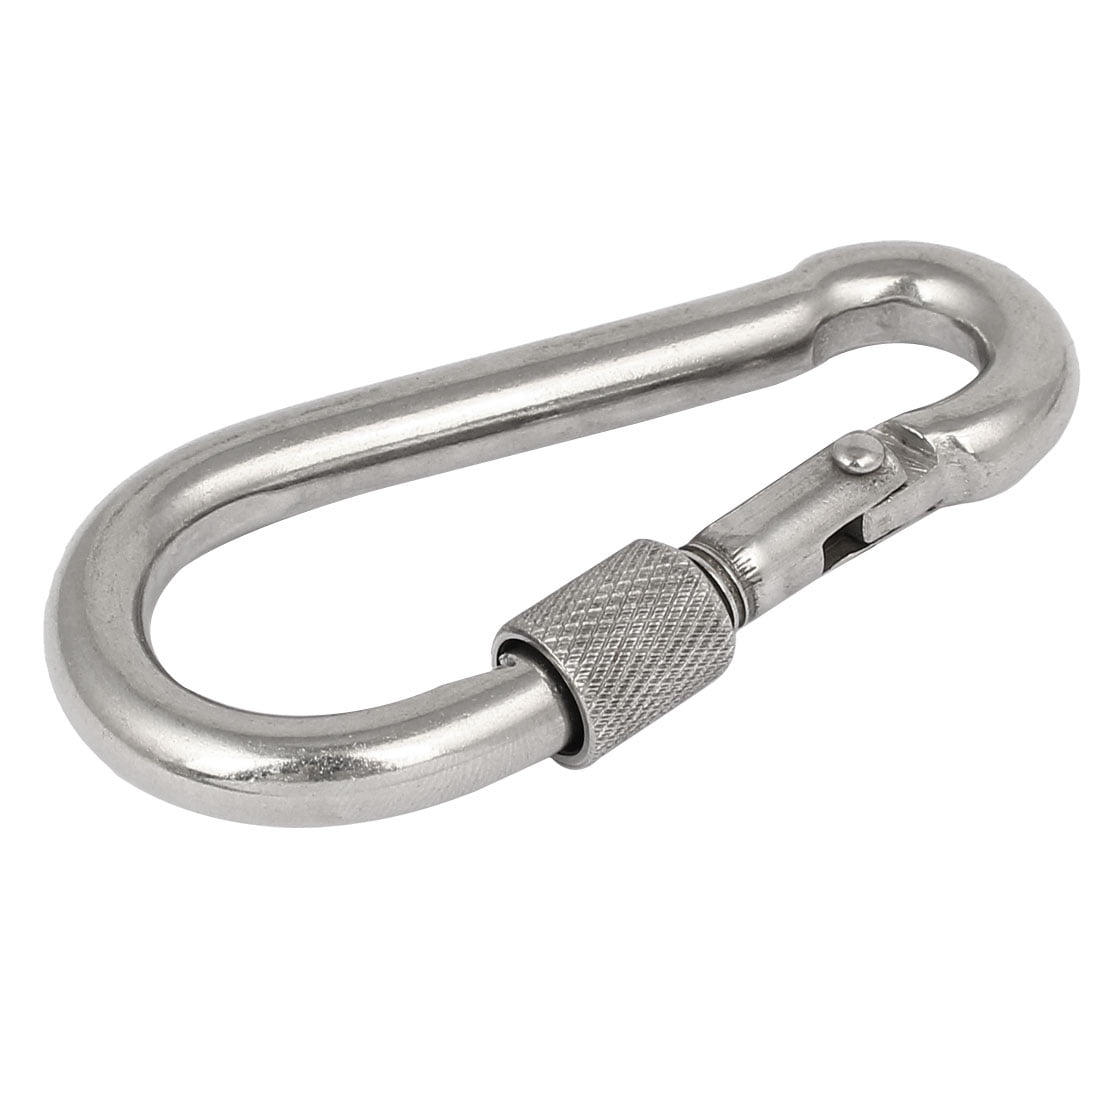 6MM STAINLESS STEEL 316 SNAP HOOK SAFETY CLIP CARABINER CLIMBING LOCK 20PCS 